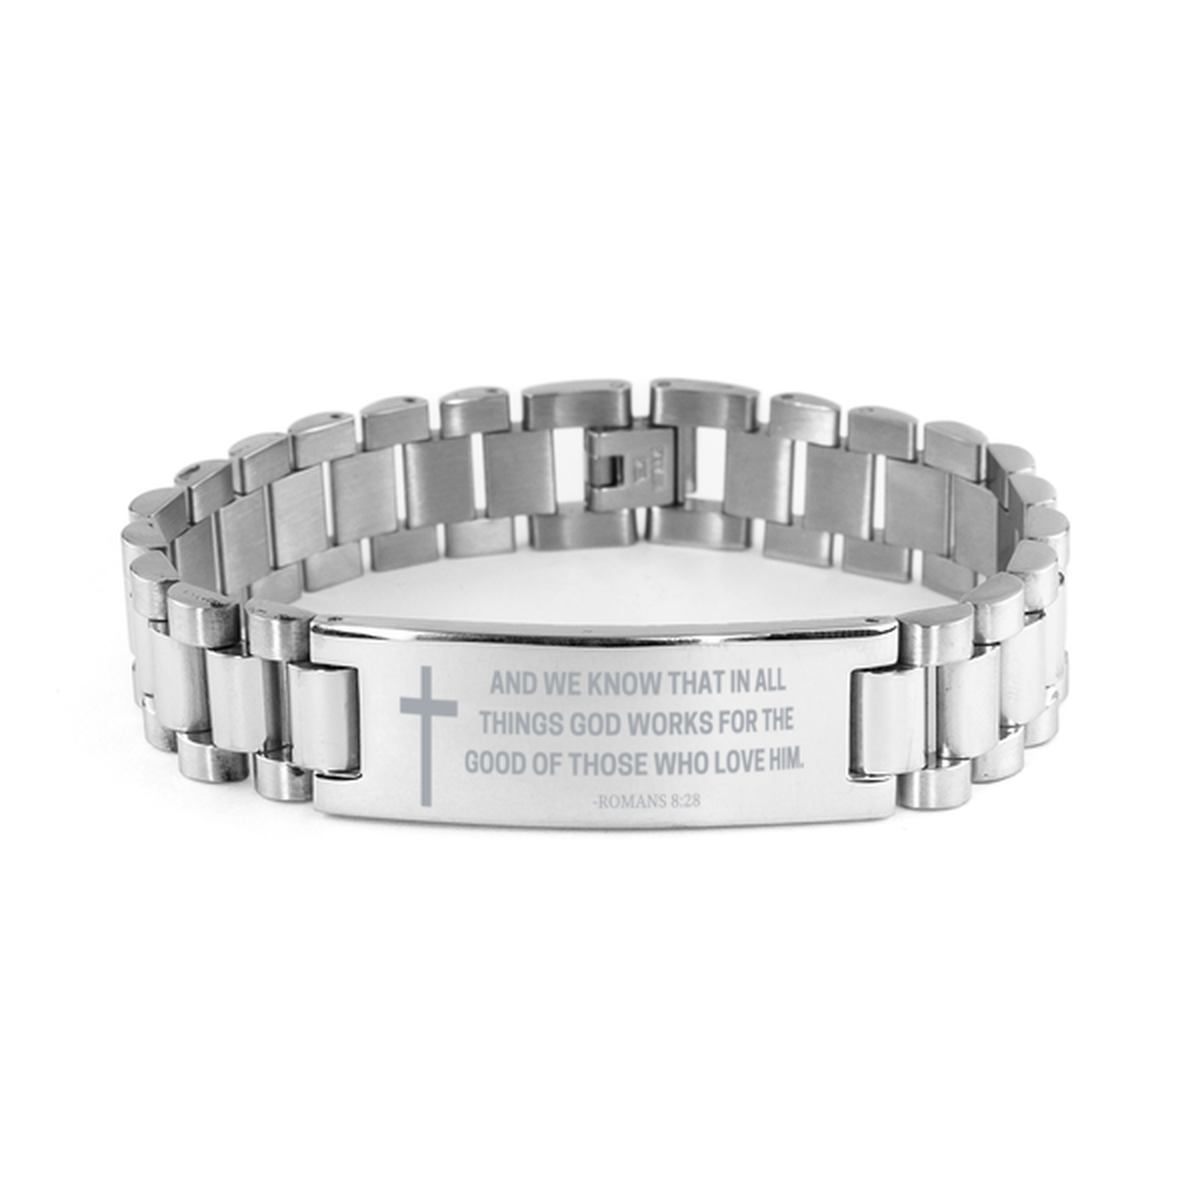 Baptism Gifts For Teenage Boys Girls, Christian Bible Verse Ladder Stainless Steel Bracelet, And we know that in all things, Catholic Confirmation Gifts for Son, Godson, Grandson, Nephew